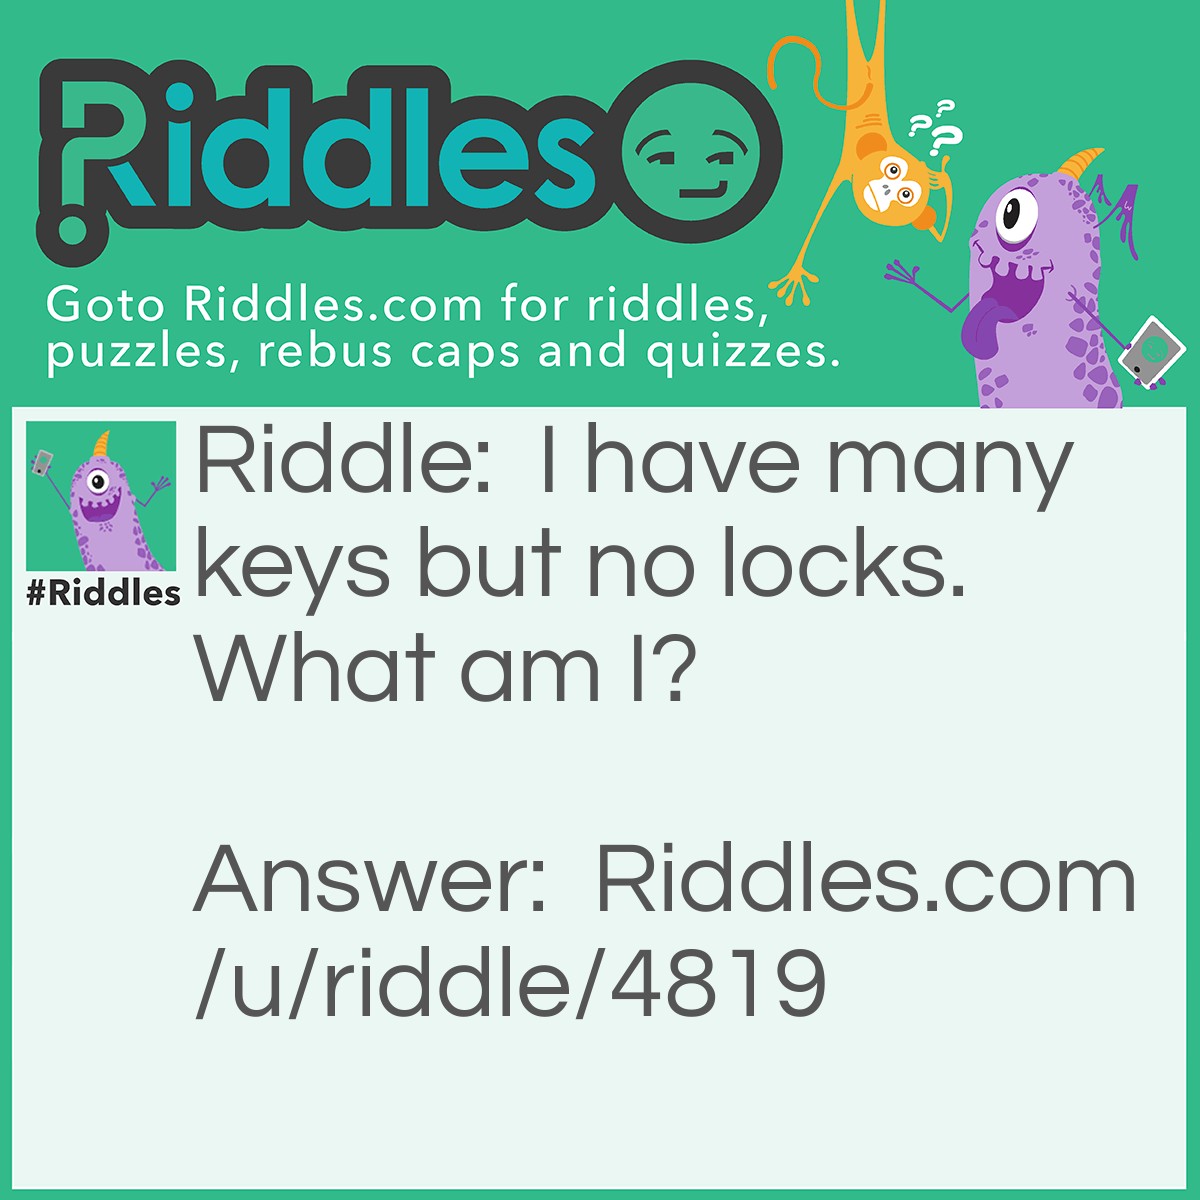 Riddle: I have many keys but no locks. What am I? Answer: A piano.